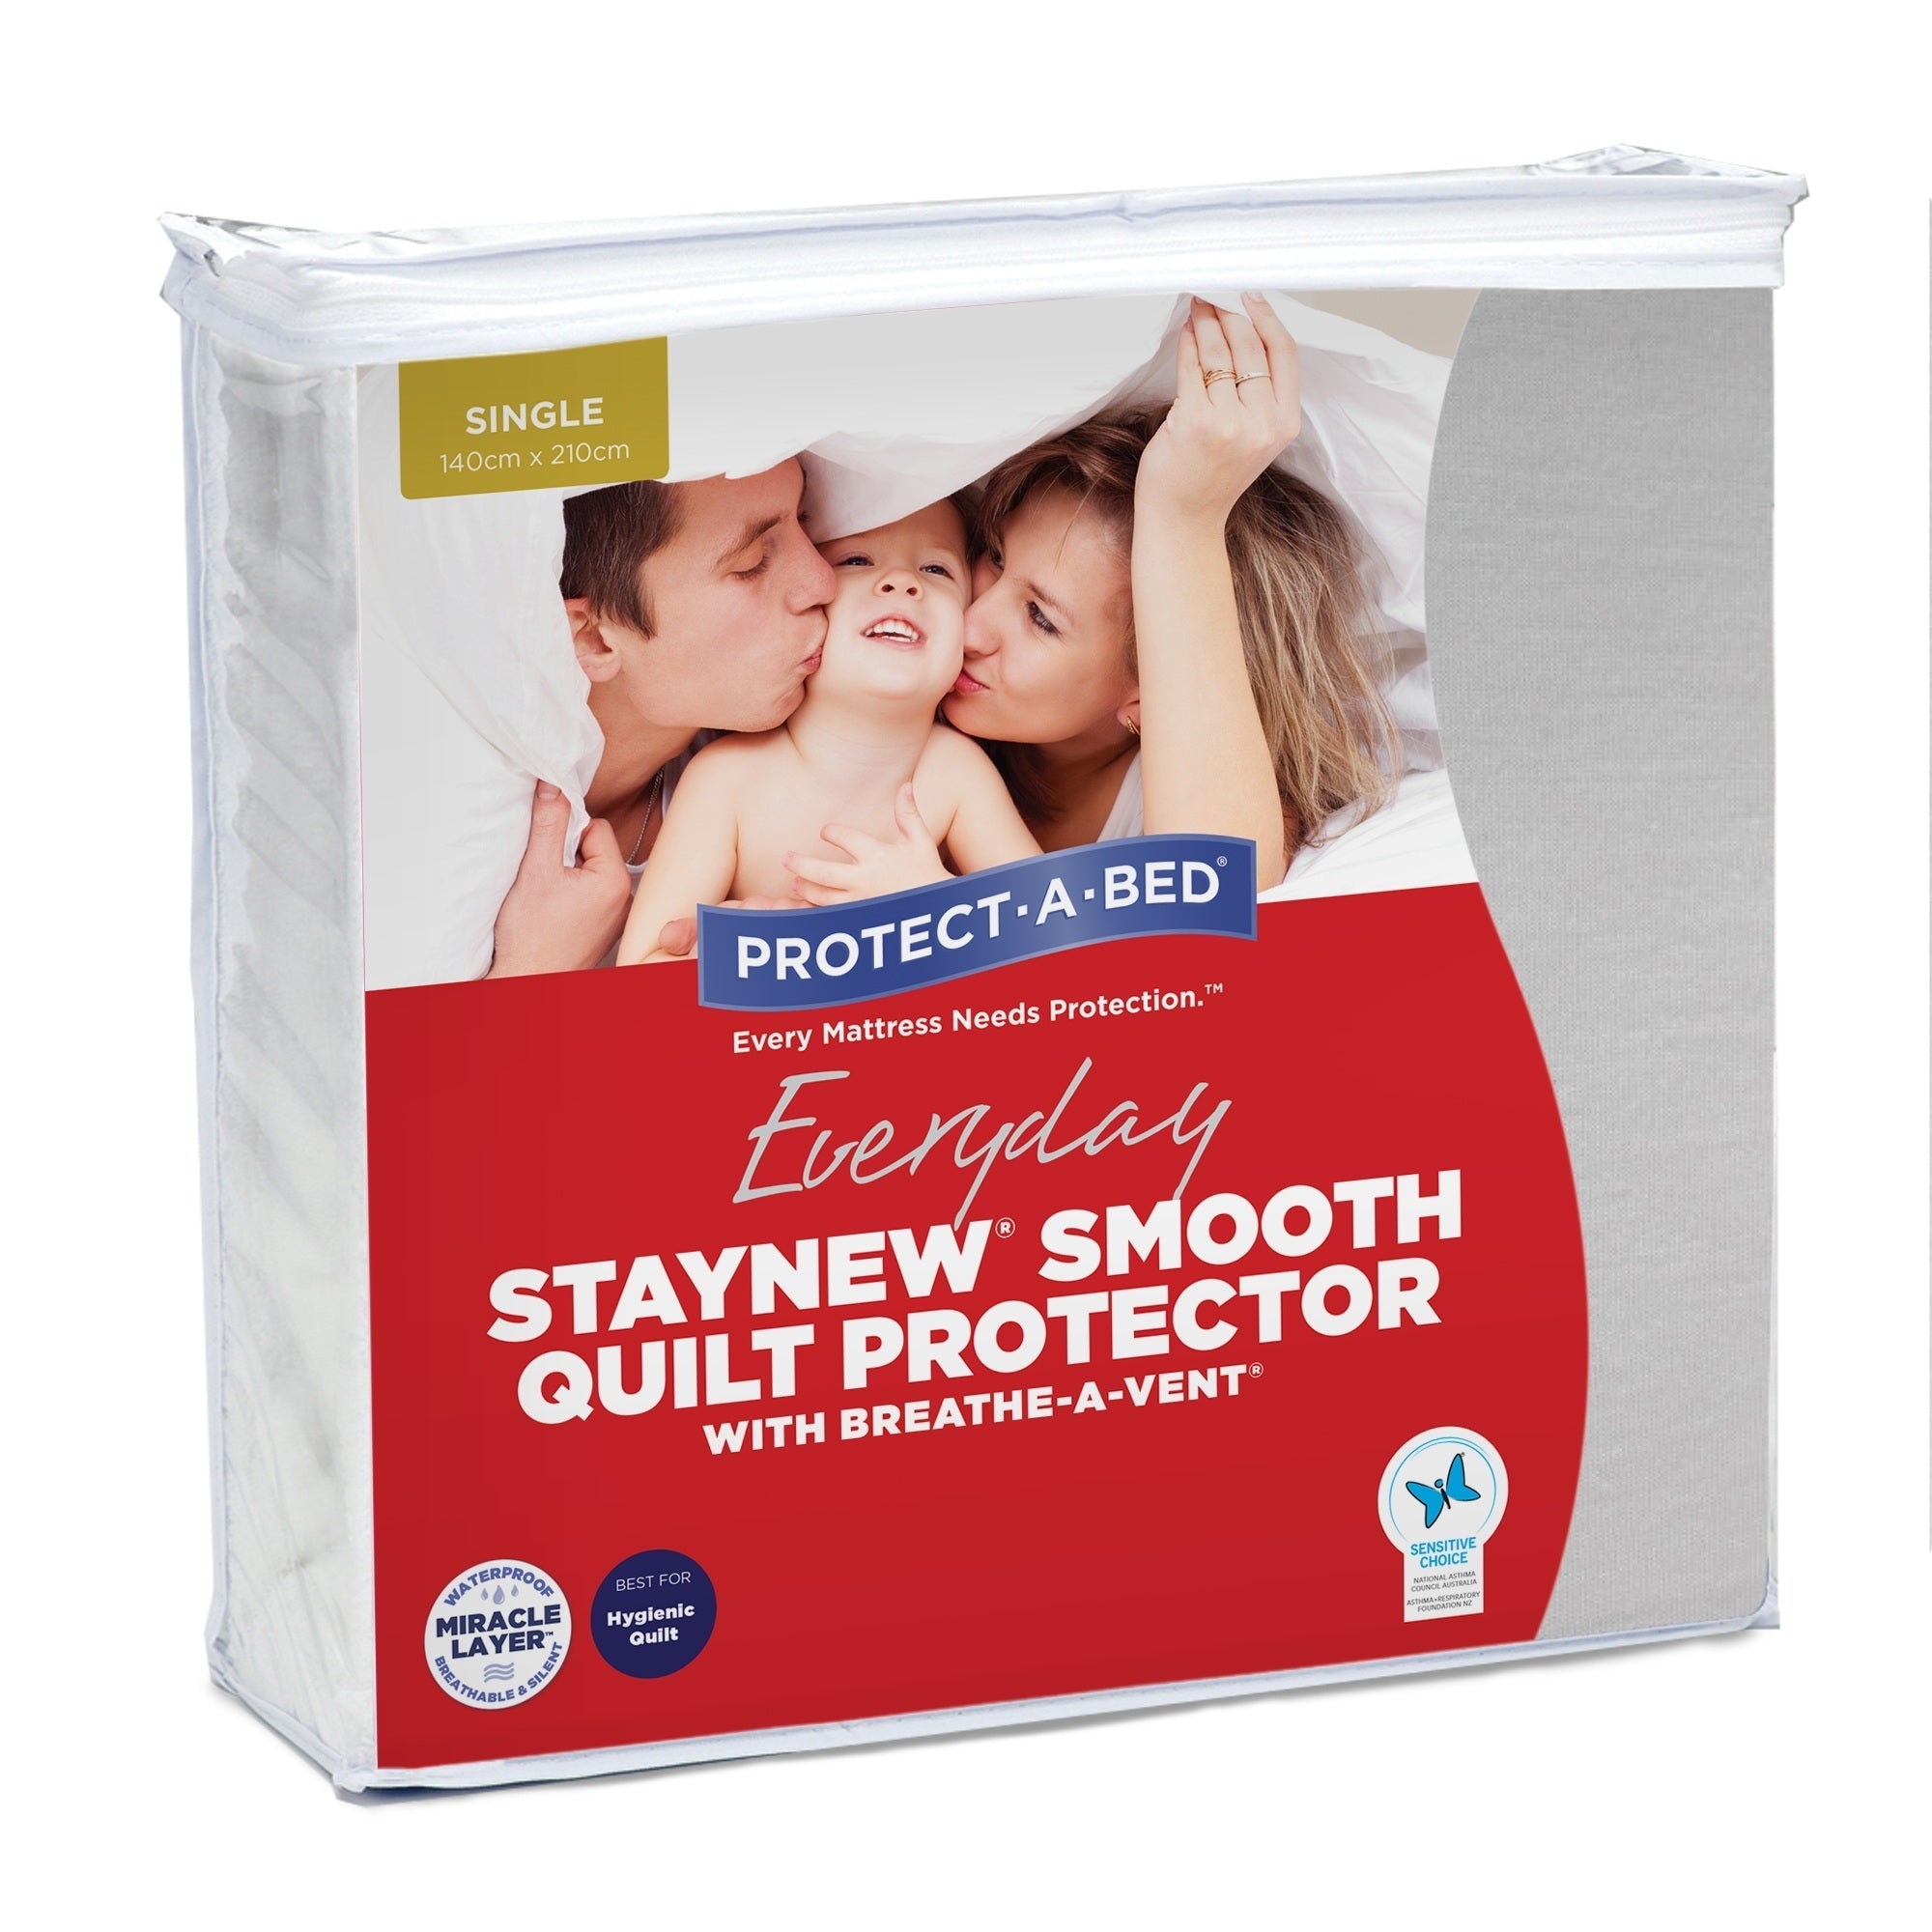 Protect-A-Bed Staynew Smooth Quilt Protector - Mattress & Pillow ScienceProtection